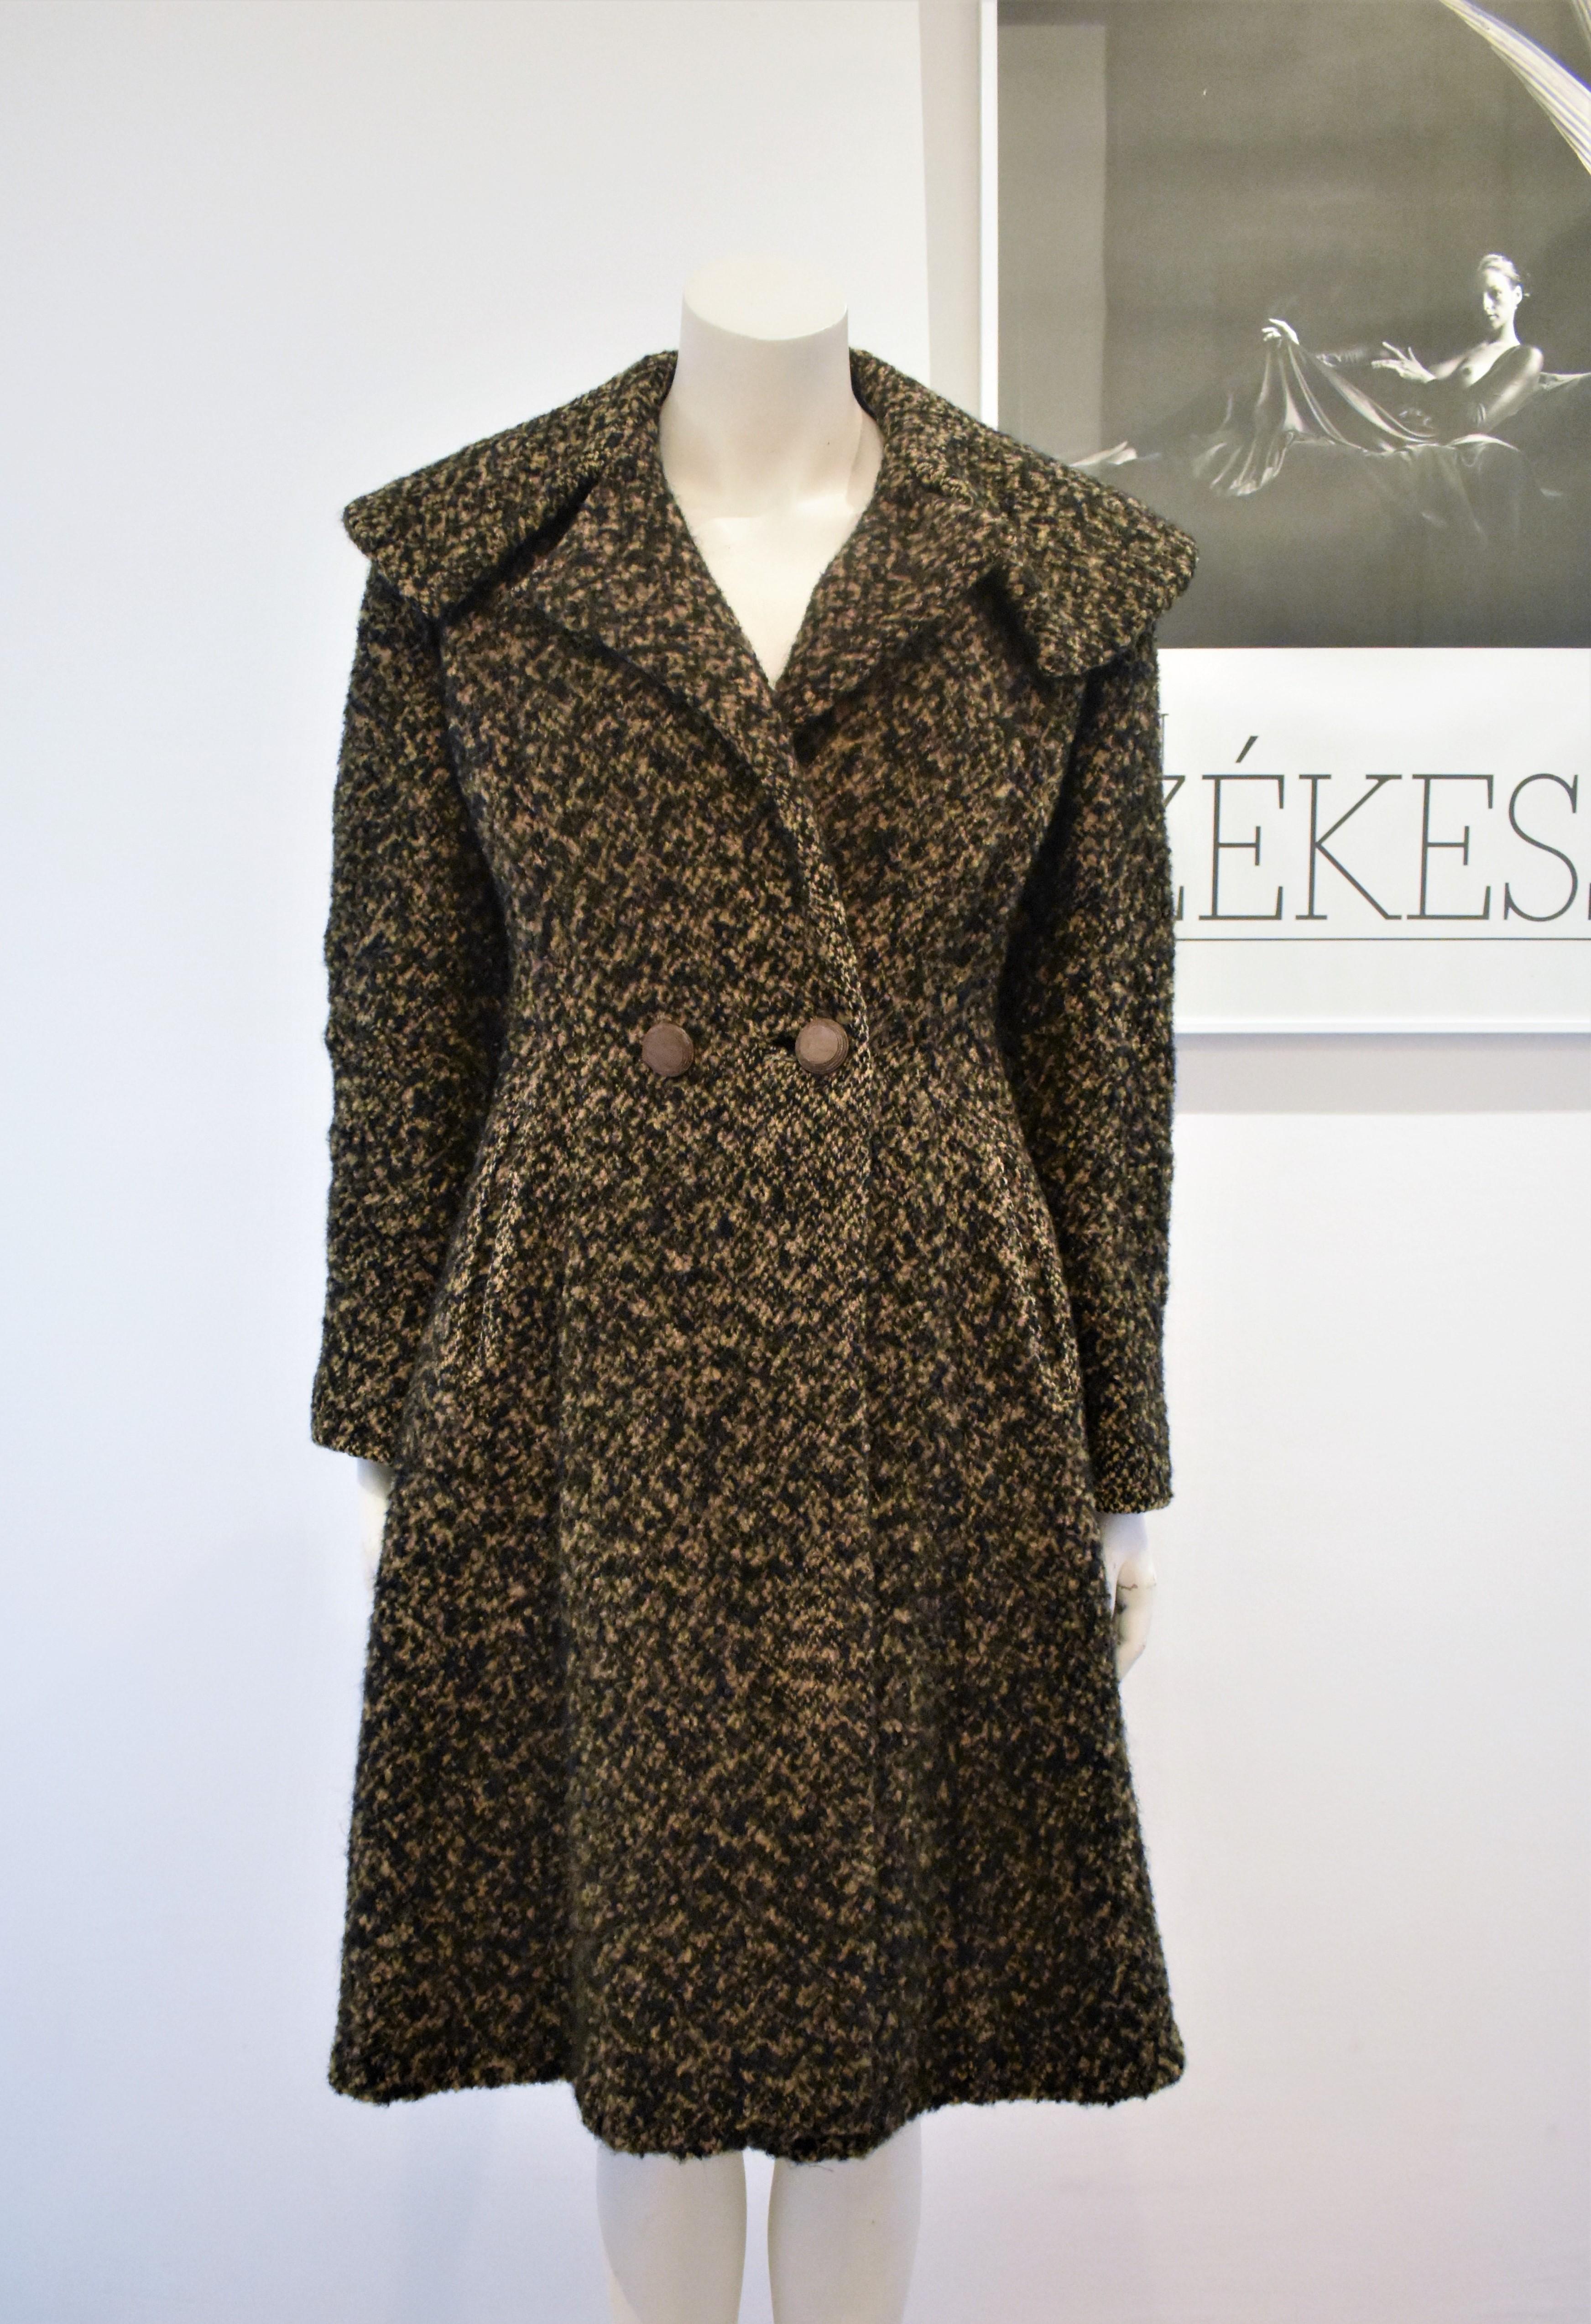 A beautiful vintage coat in Christian Dior's new look style. It is in good condition for its age and very heavy and warm.